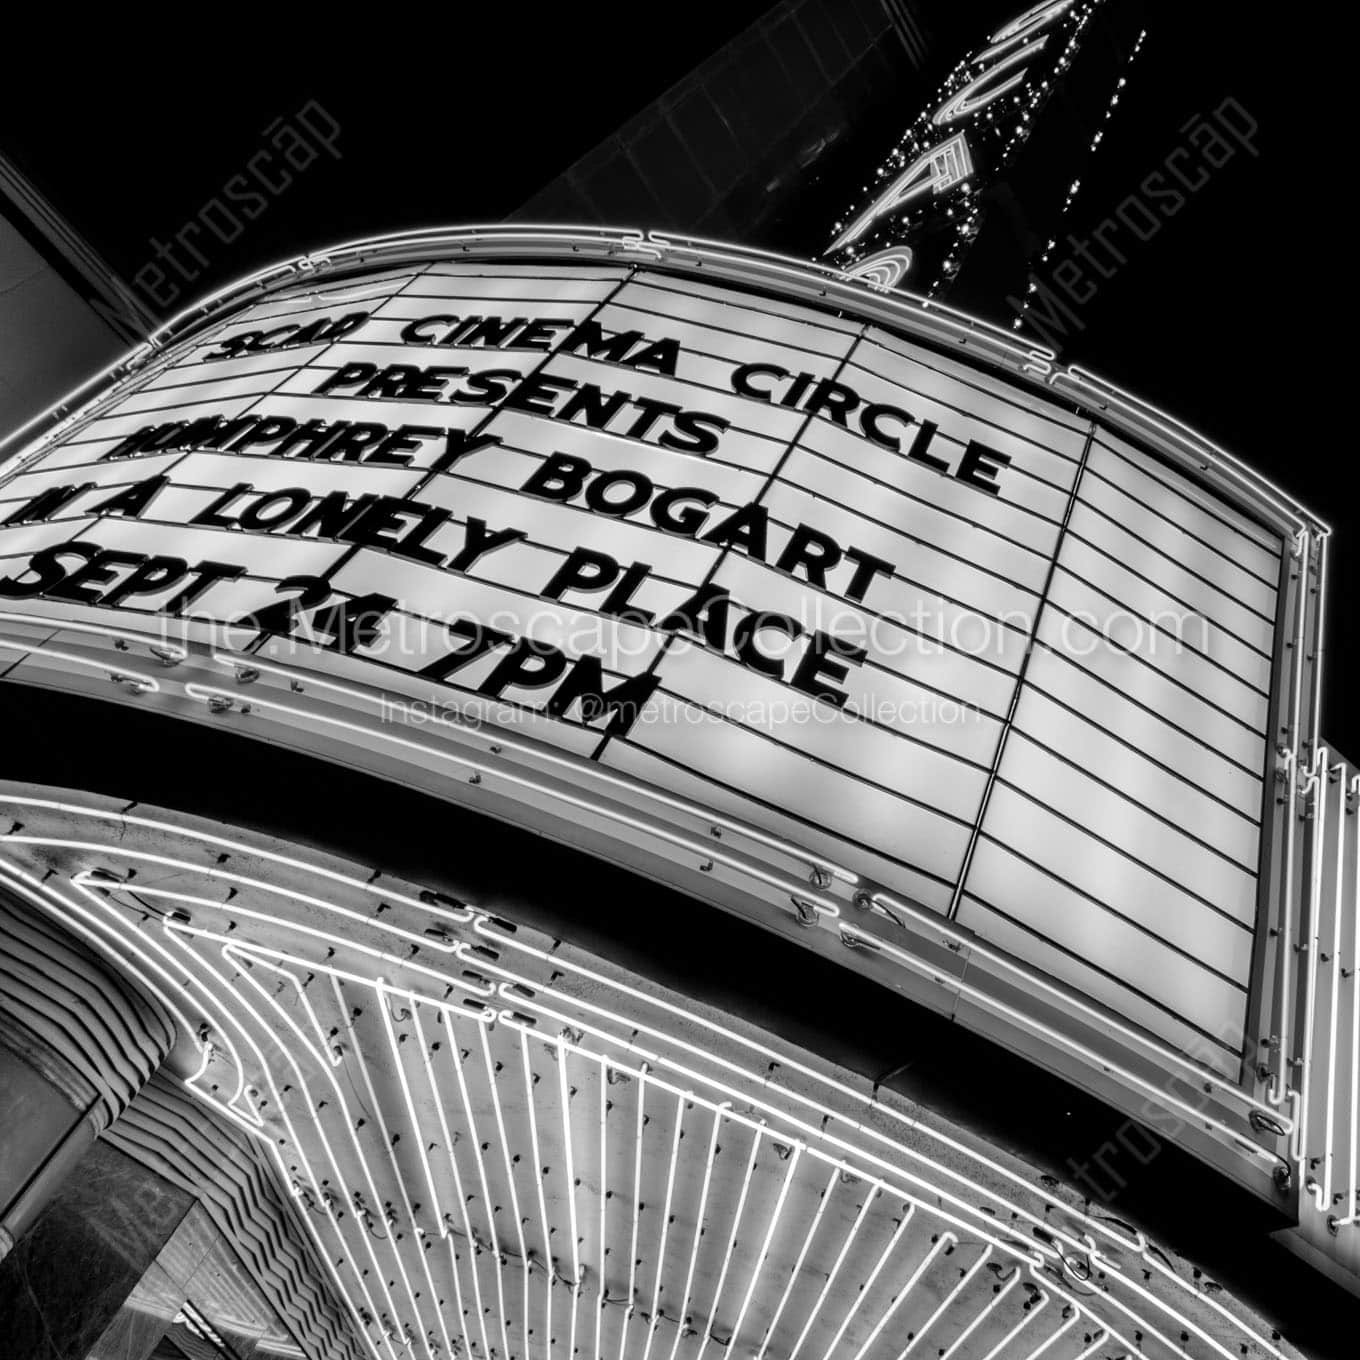 scad theater marquee Black & White Office Art